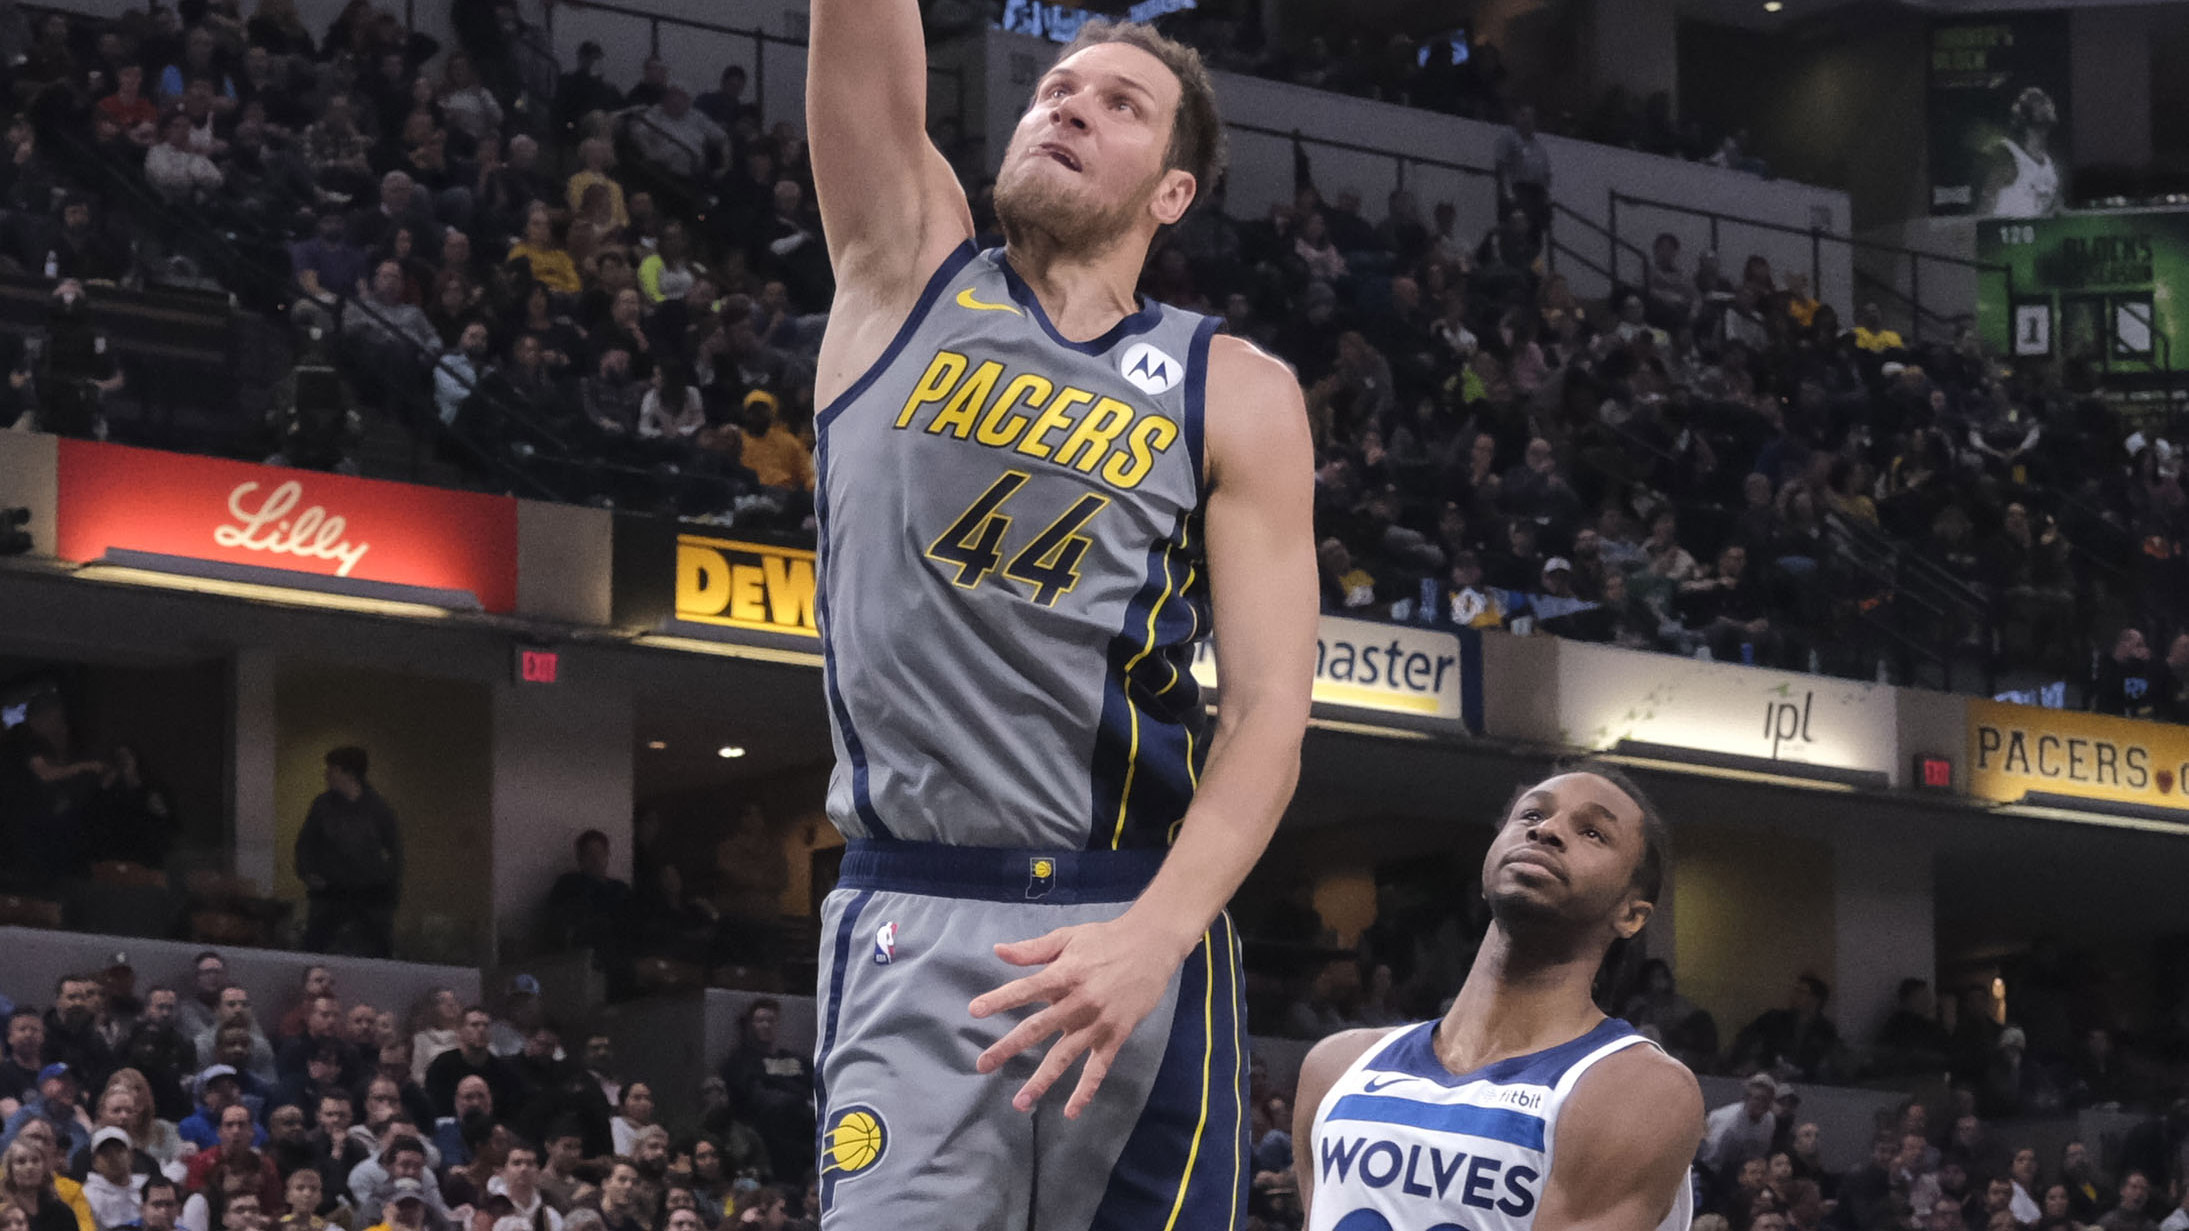 Bogey scores 37 points, Pacers cool down Towns for 122-115 win